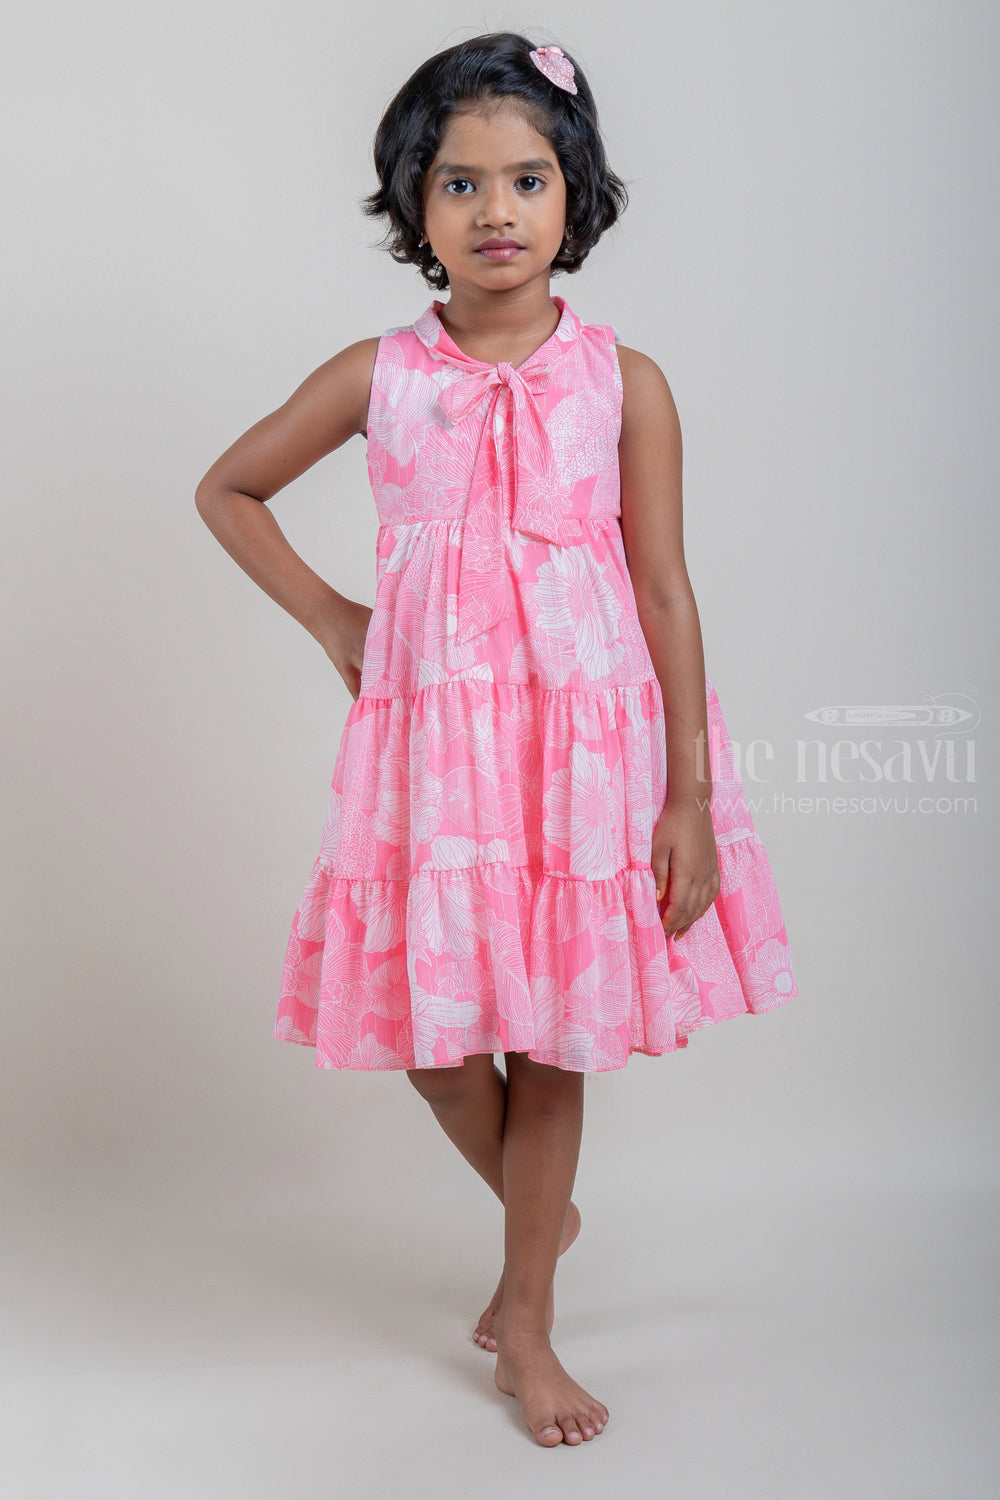 The Nesavu Frocks & Dresses Monochrome Pink Tropical Floral Printed N Layered A-Line Frock with Tie-Up Rope For Babys psr silks Nesavu